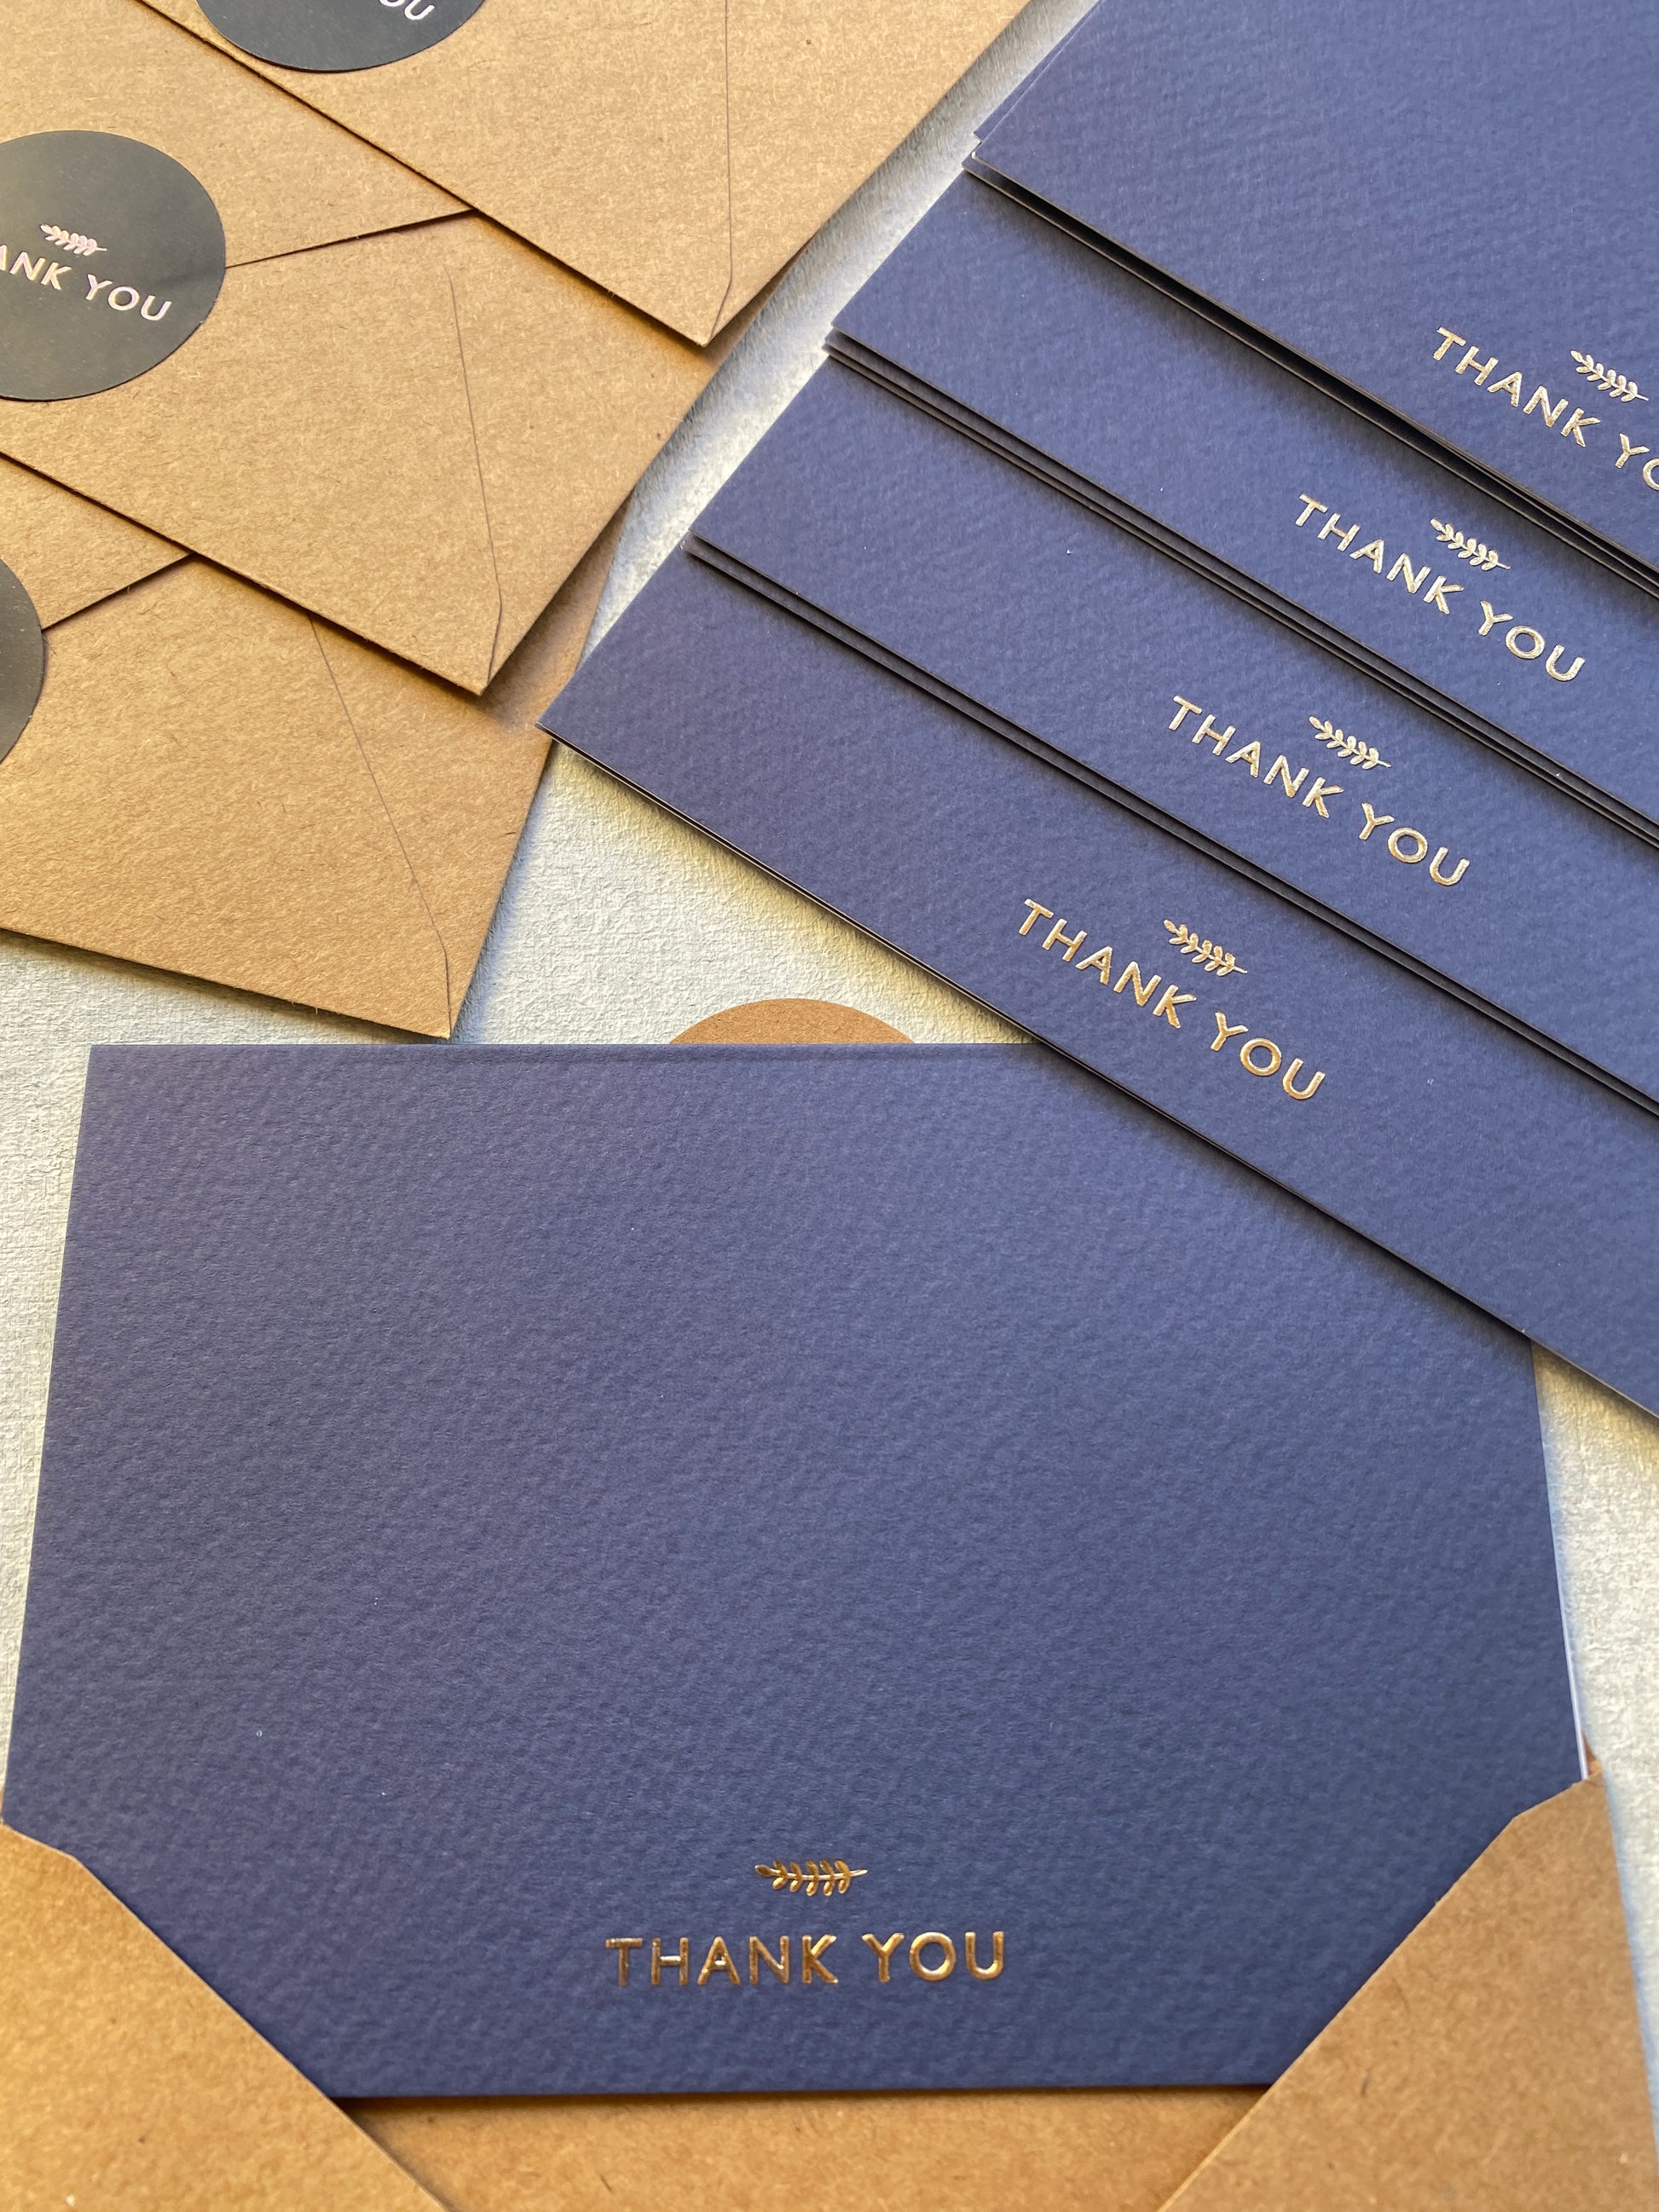 Paper Clever Party Navy and Gold Baby Shower Thank You Cards with Envelopes Boys Blank Prefilled Note Thanking for Gifts, Royal Prince Stationery